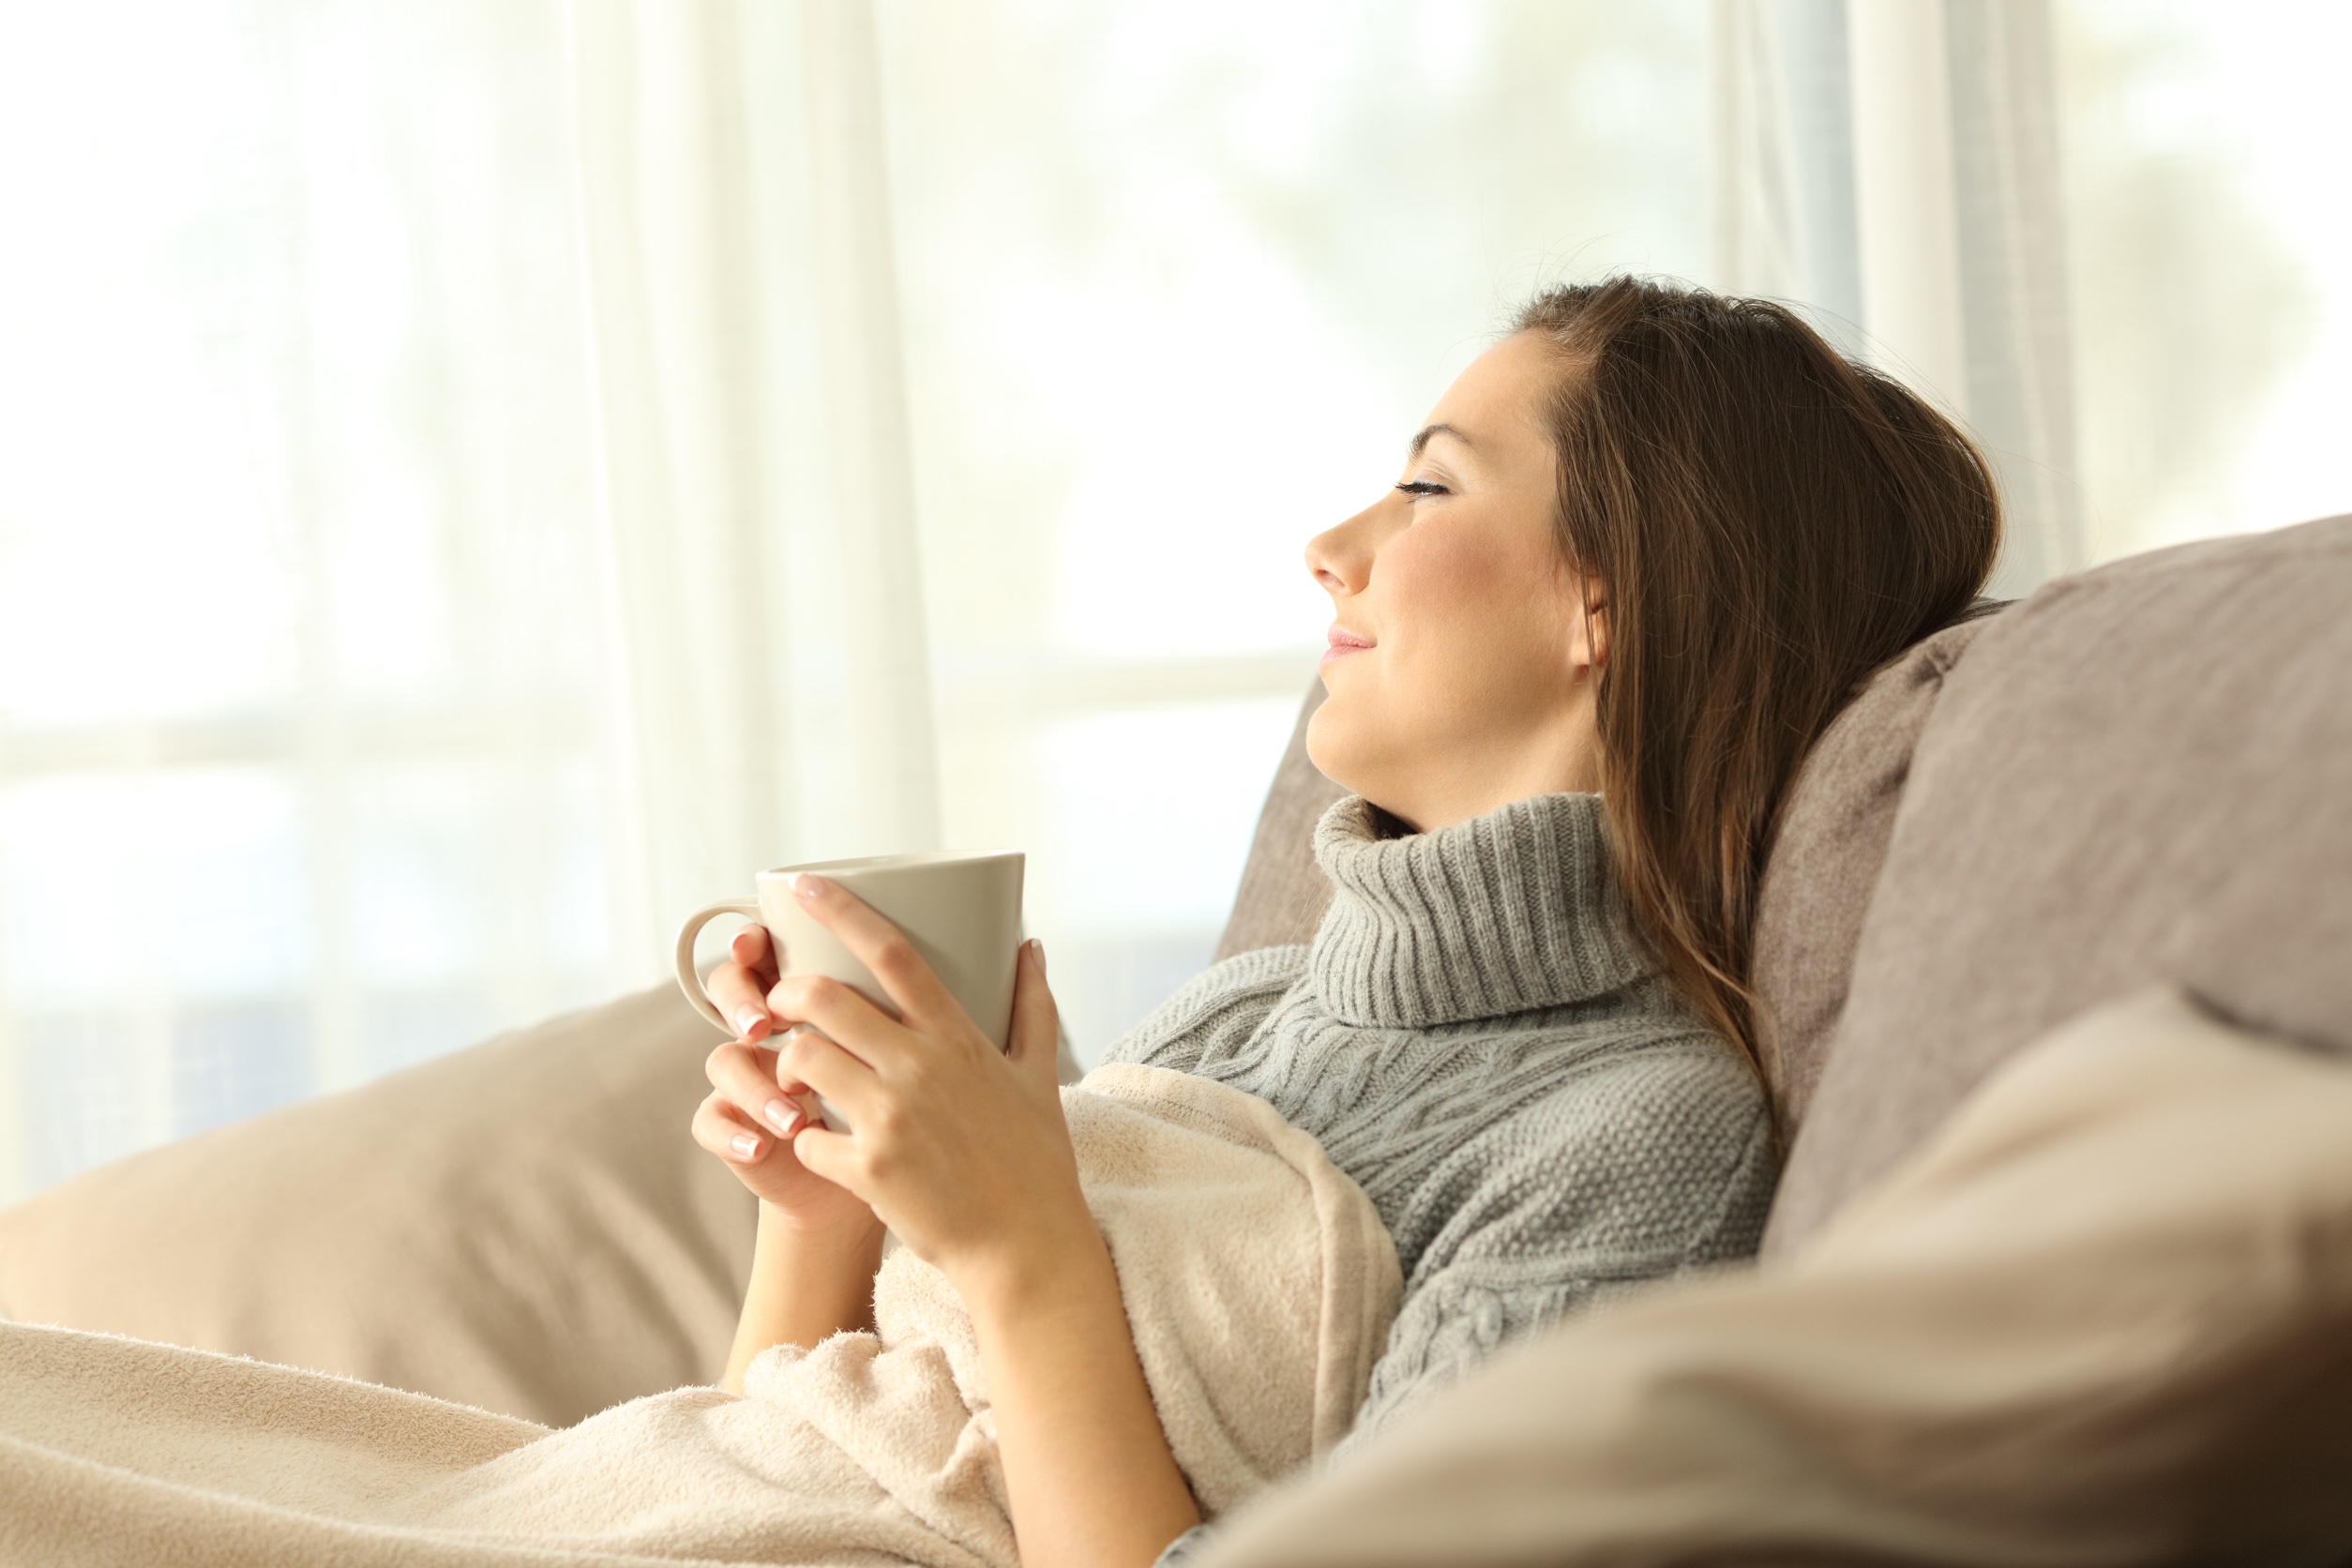 Woman in a cozy sweater relaxing on a couch with a cup of tea, a serene moment after acupuncture therapy for headache relief.